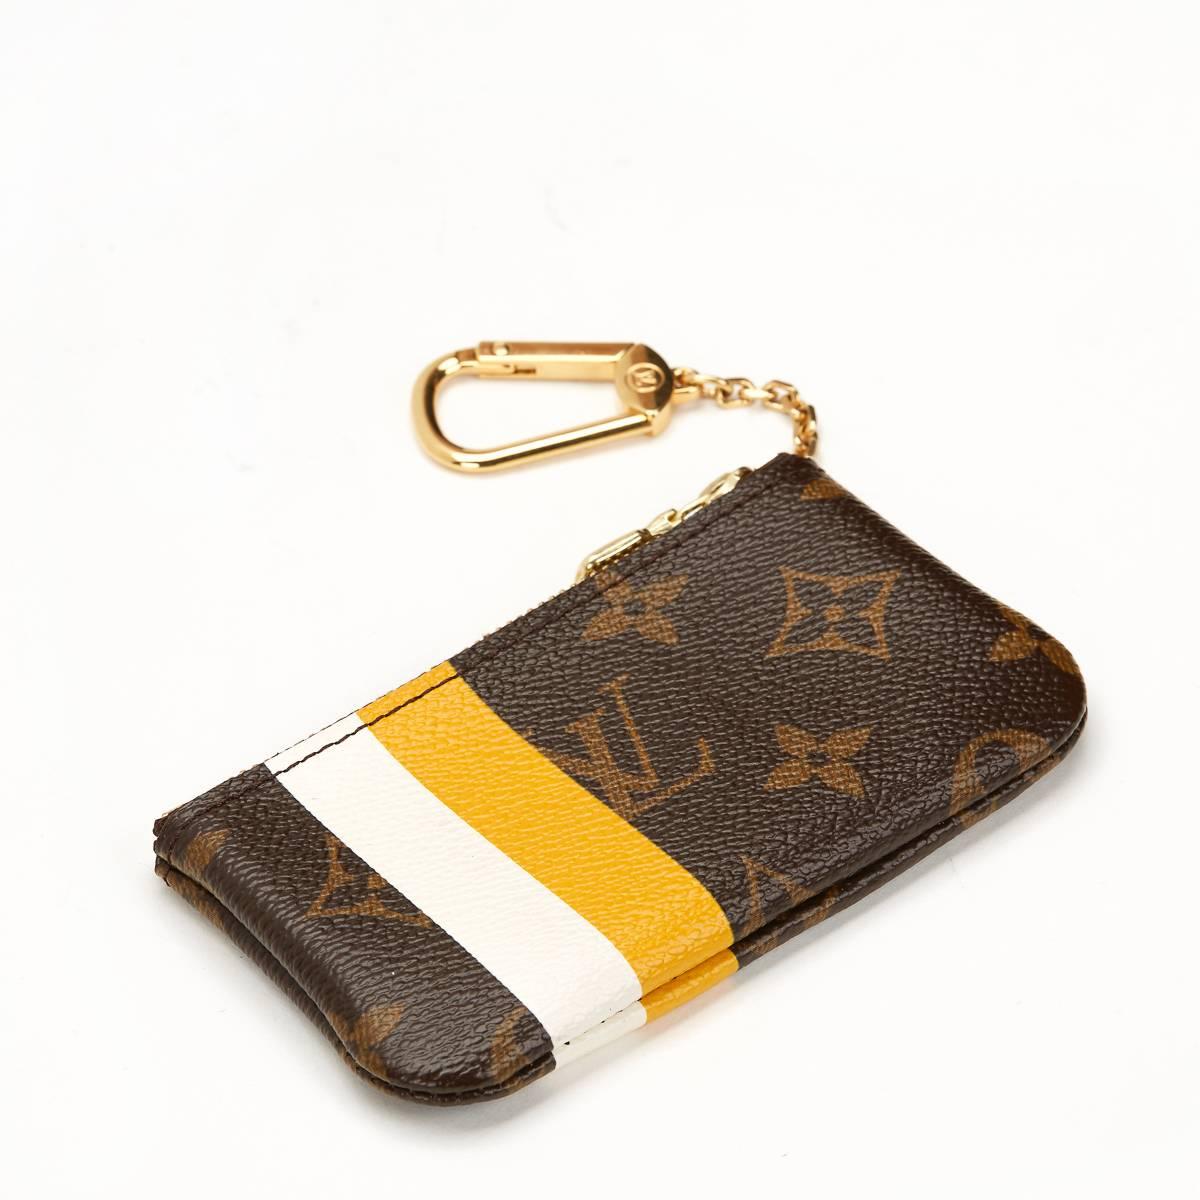 LOUIS VUITTON
Brown Classic Monogram Coated Canvas Groom Edition Key Pouch

This LOUIS VUITTON Key Pouch is in Excellent Pre-Owned Condition. Circa 2006. Primarily made from Coated Canvas complimented by Golden Brass hardware. Our  reference is